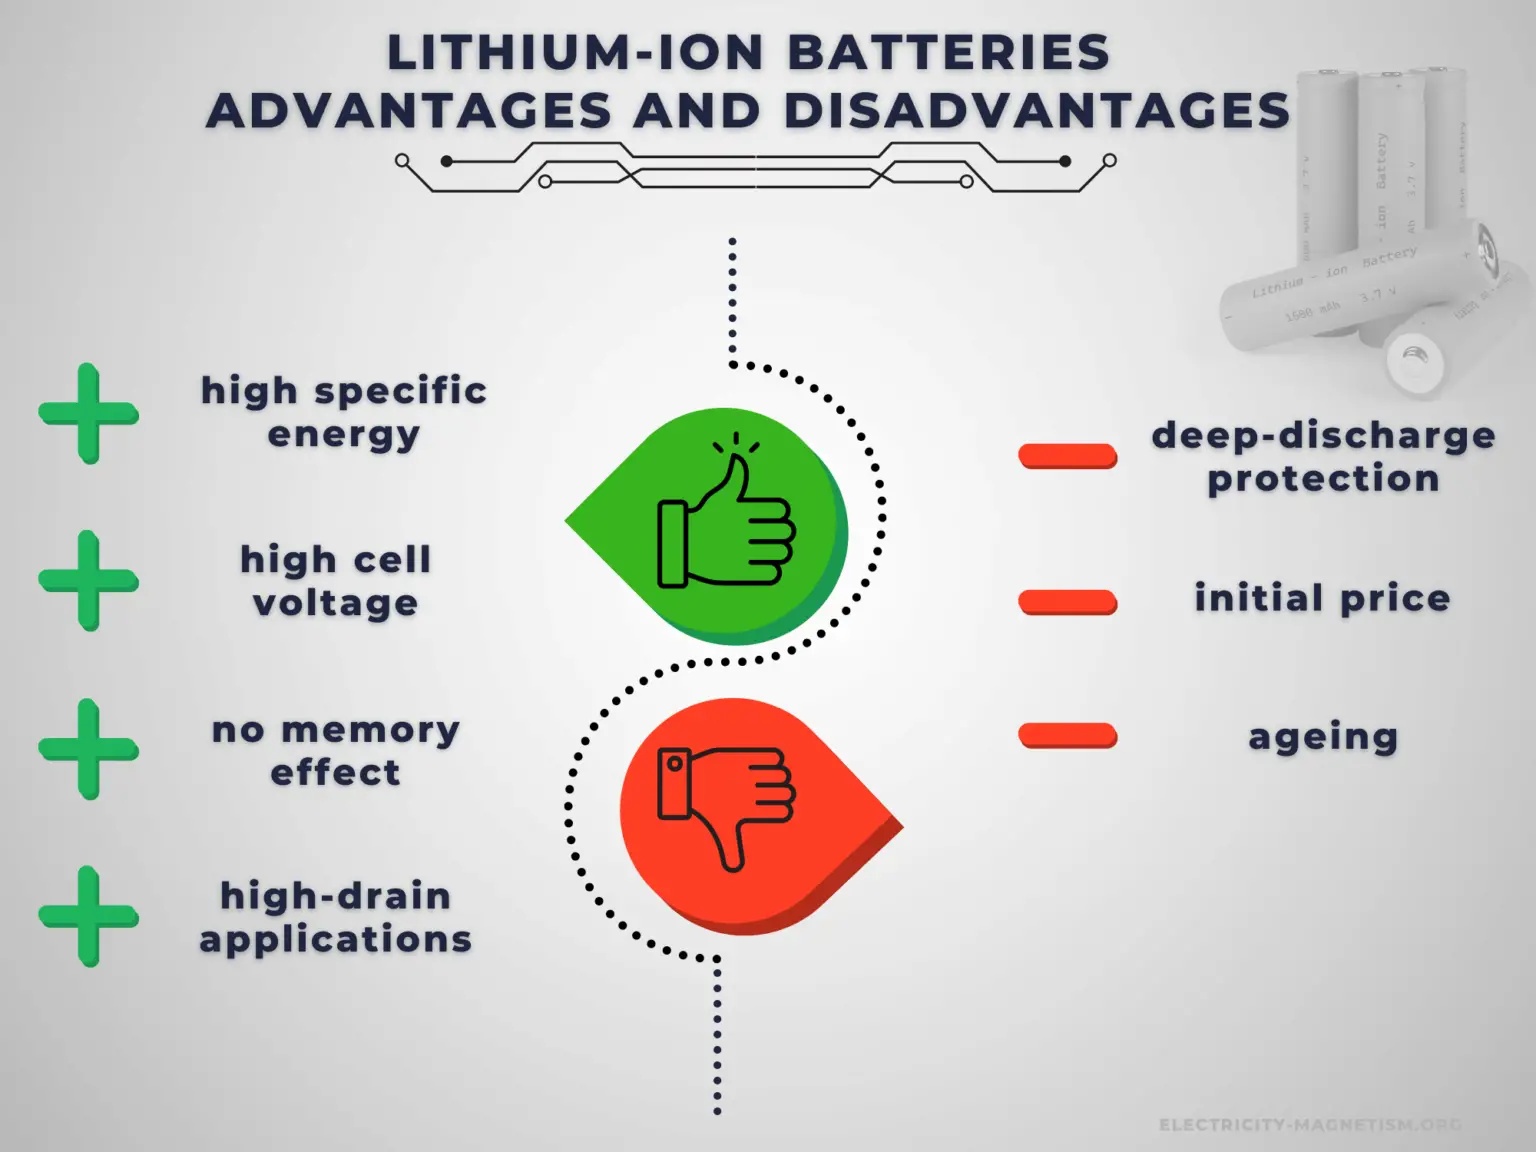 What's the Advantages and Disadvantages of Lithium-ion Batteries?